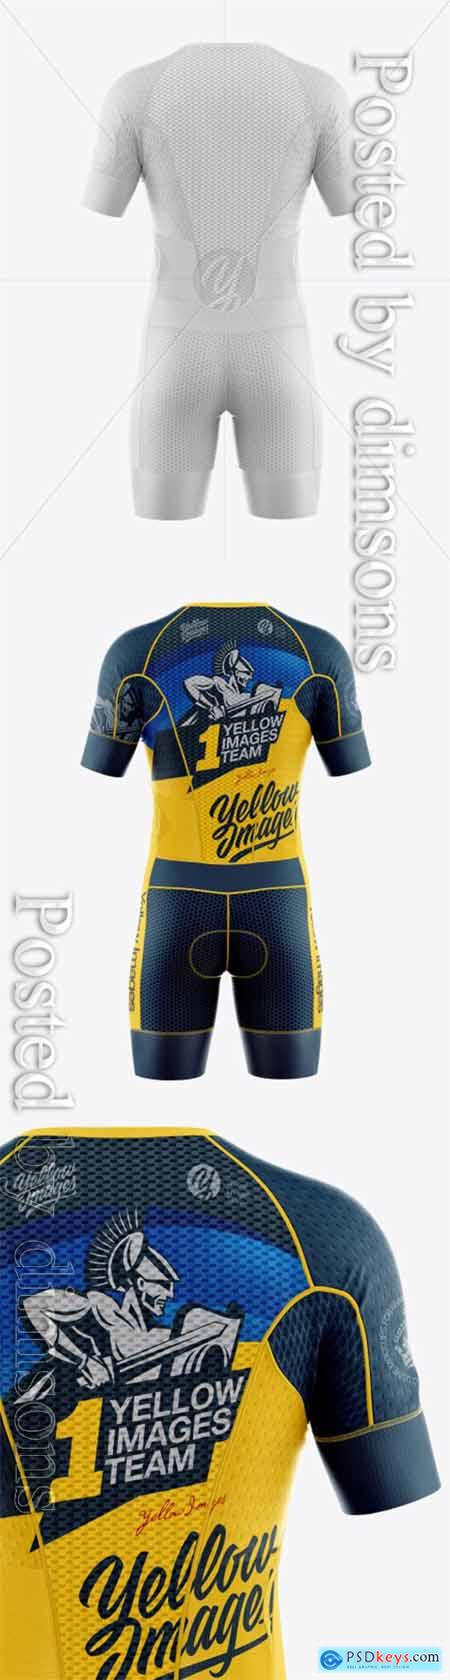 Download Men's Cycling Kit Mockup » Free Download Photoshop Vector ...